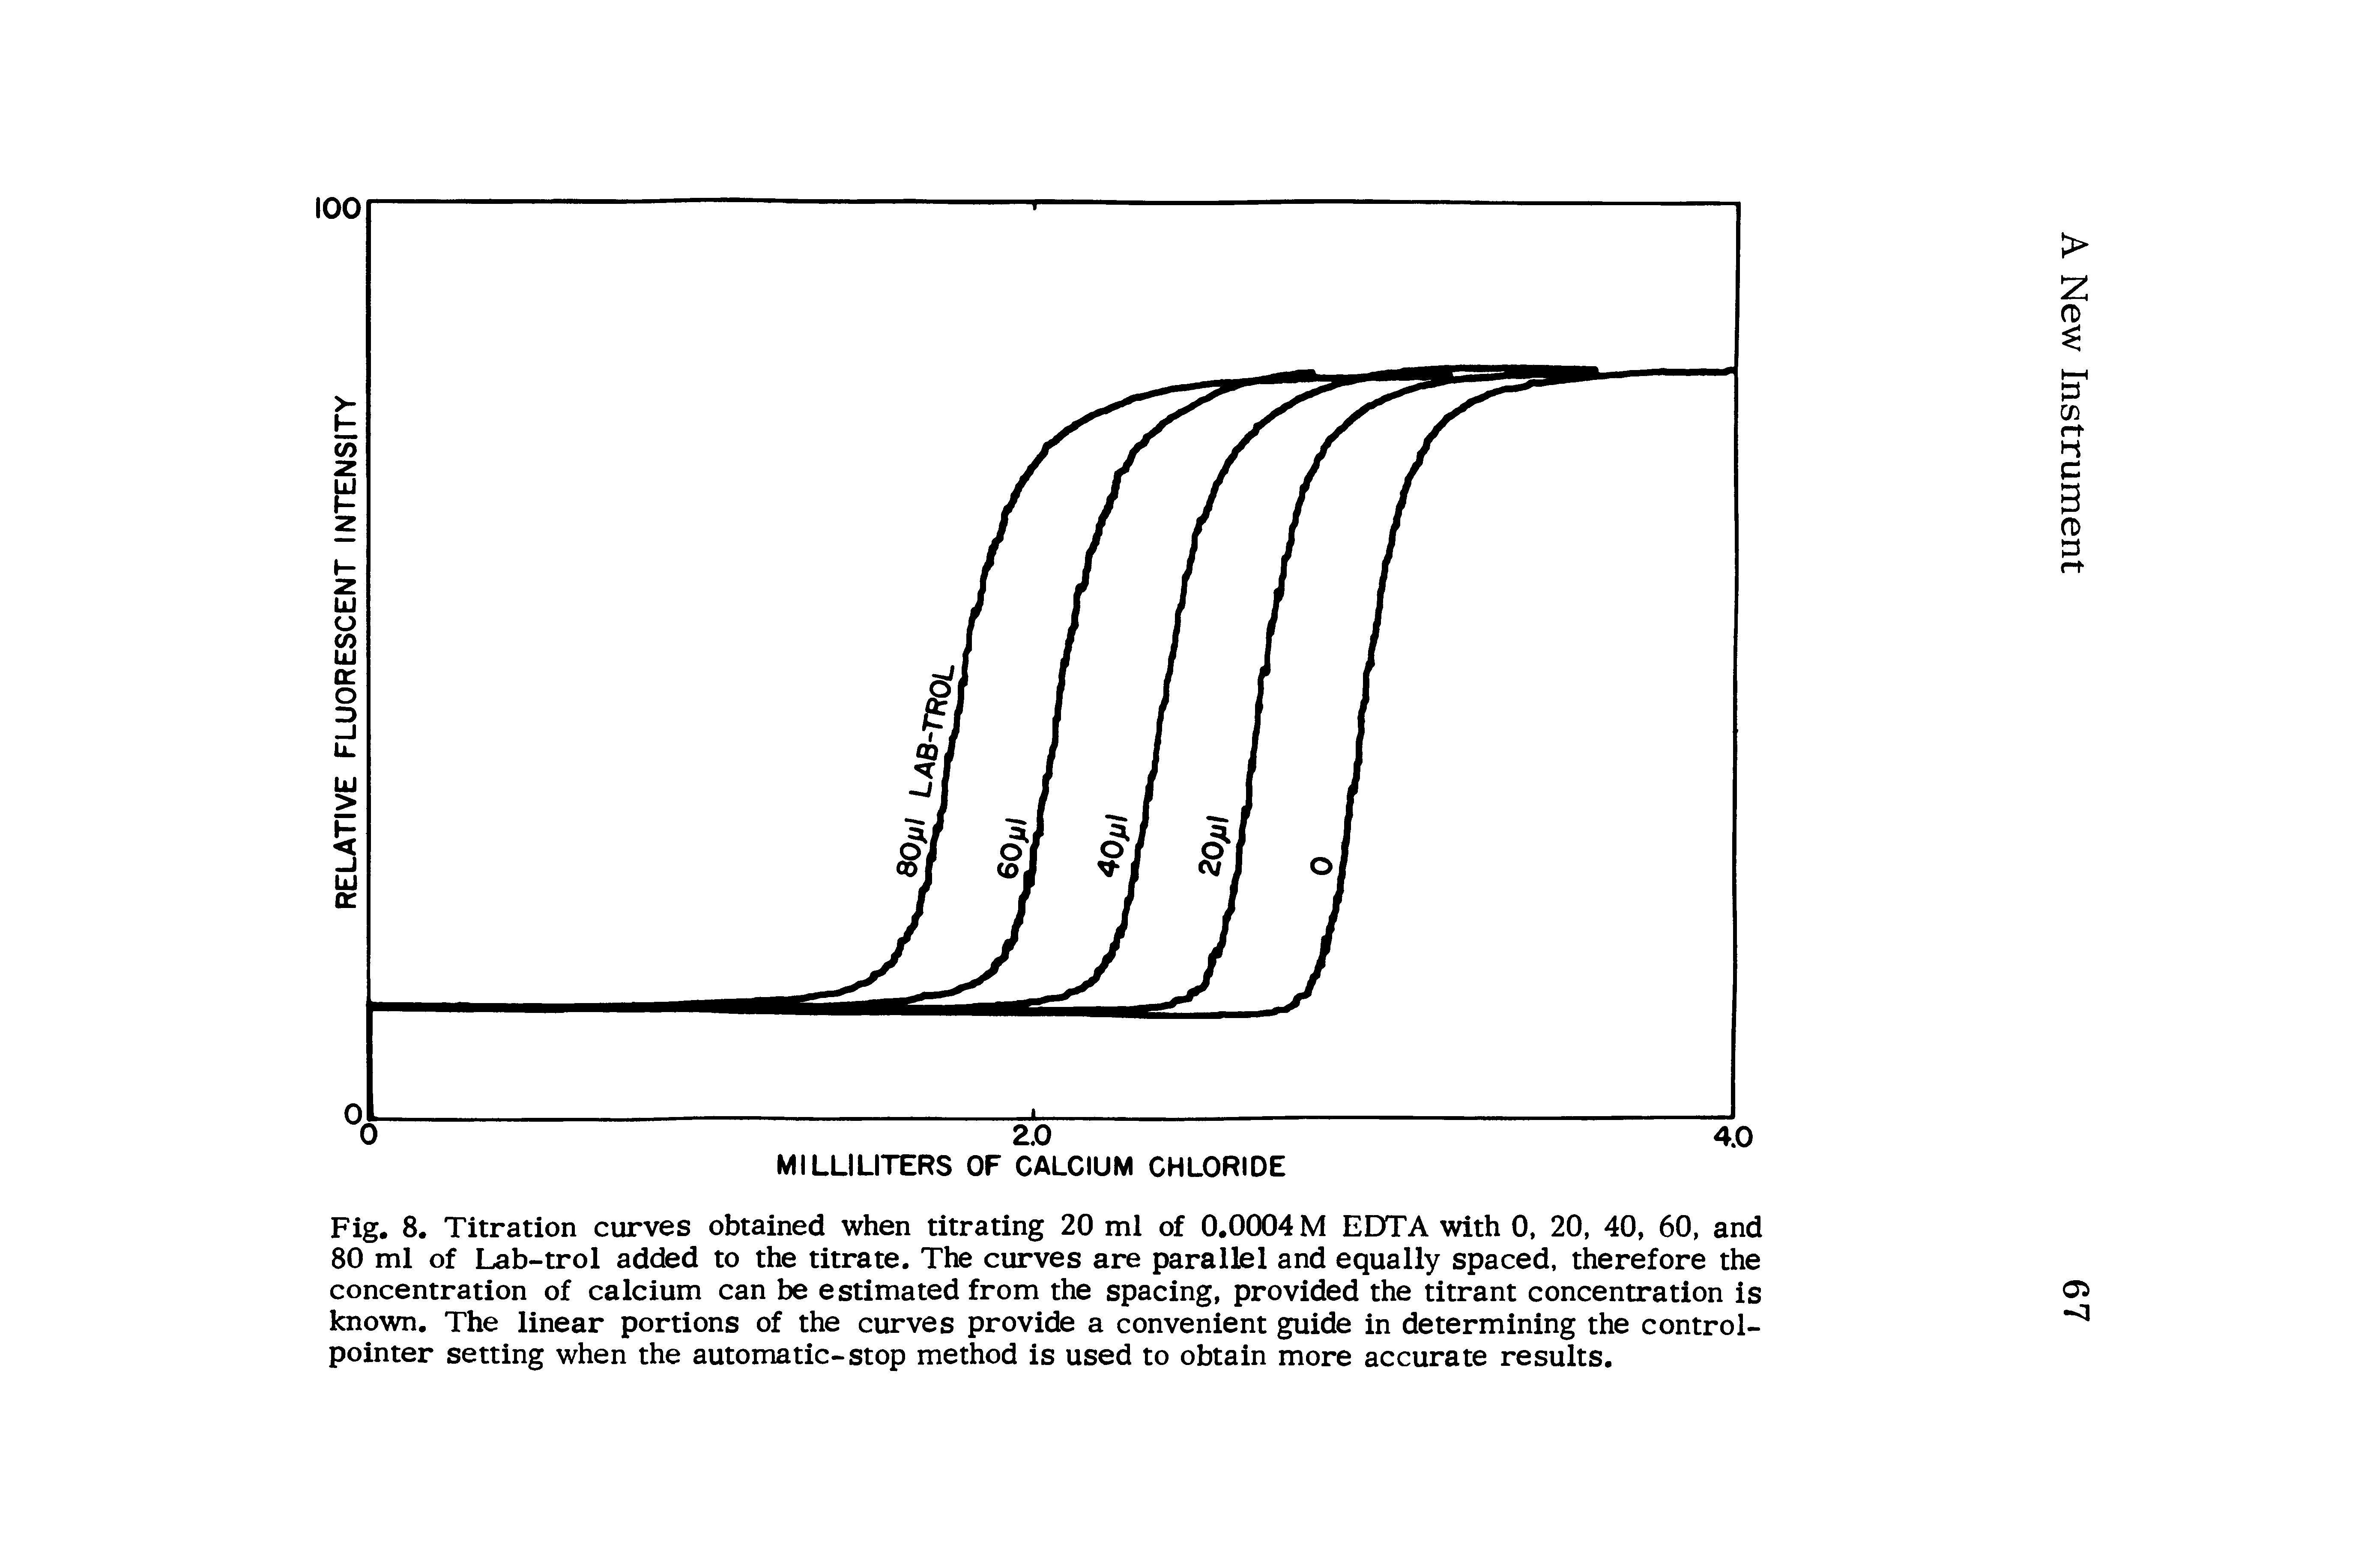 Fig. 8. Titration curves obtained when titrating 20 ml of 0.0004 M EDTA with 0, 20, 40, 60, and 80 ml of Lab-trol added to the titrate. The curves are parallel and equally spaced, therefore the concentration of calcium can be estimated from the spacing, provided the titrant concentration is known. The linear portions of the curves provide a convenient guide in determining the control-pointer setting when the automatic-stop method is used to obtain more accurate results.